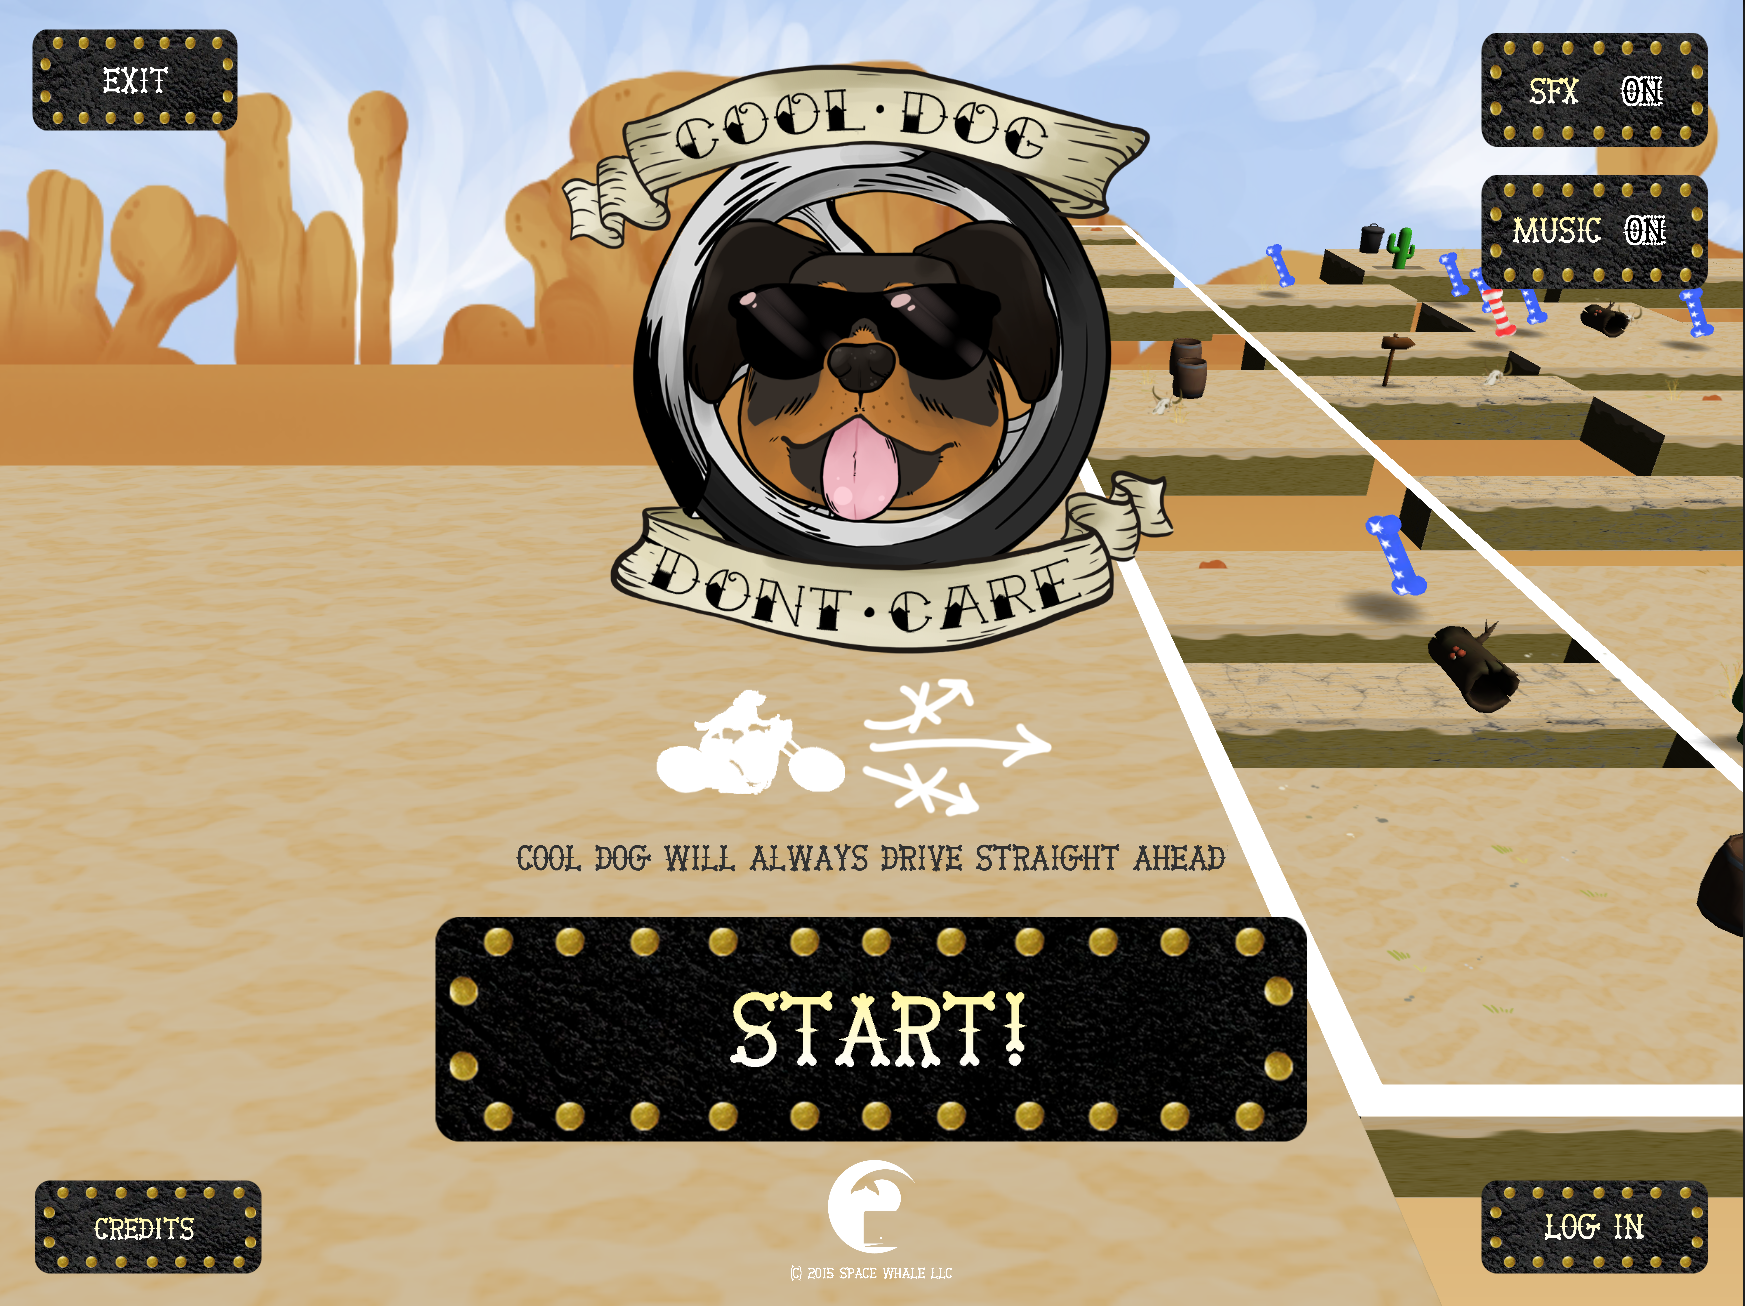 Cool Dog Don&rsquo;t Care is available on iOS and Android.